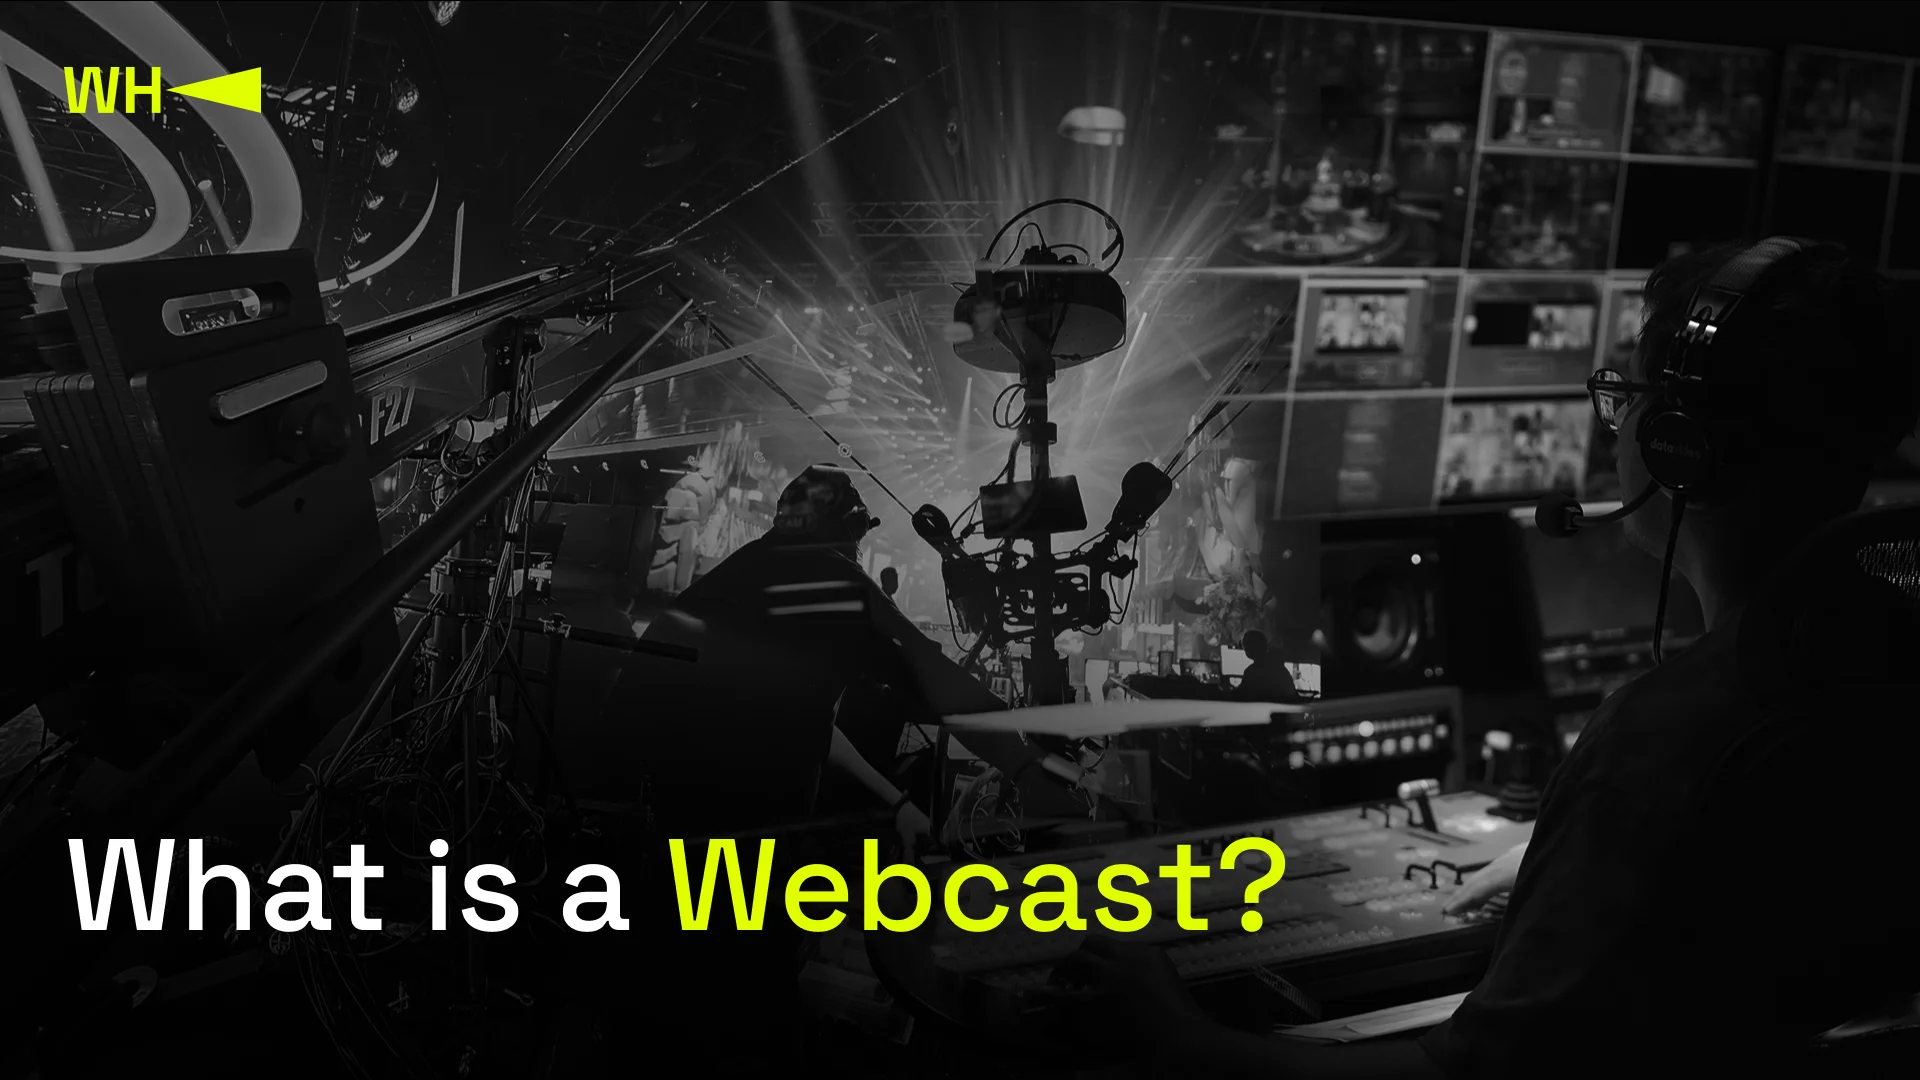 What is a Webcast?